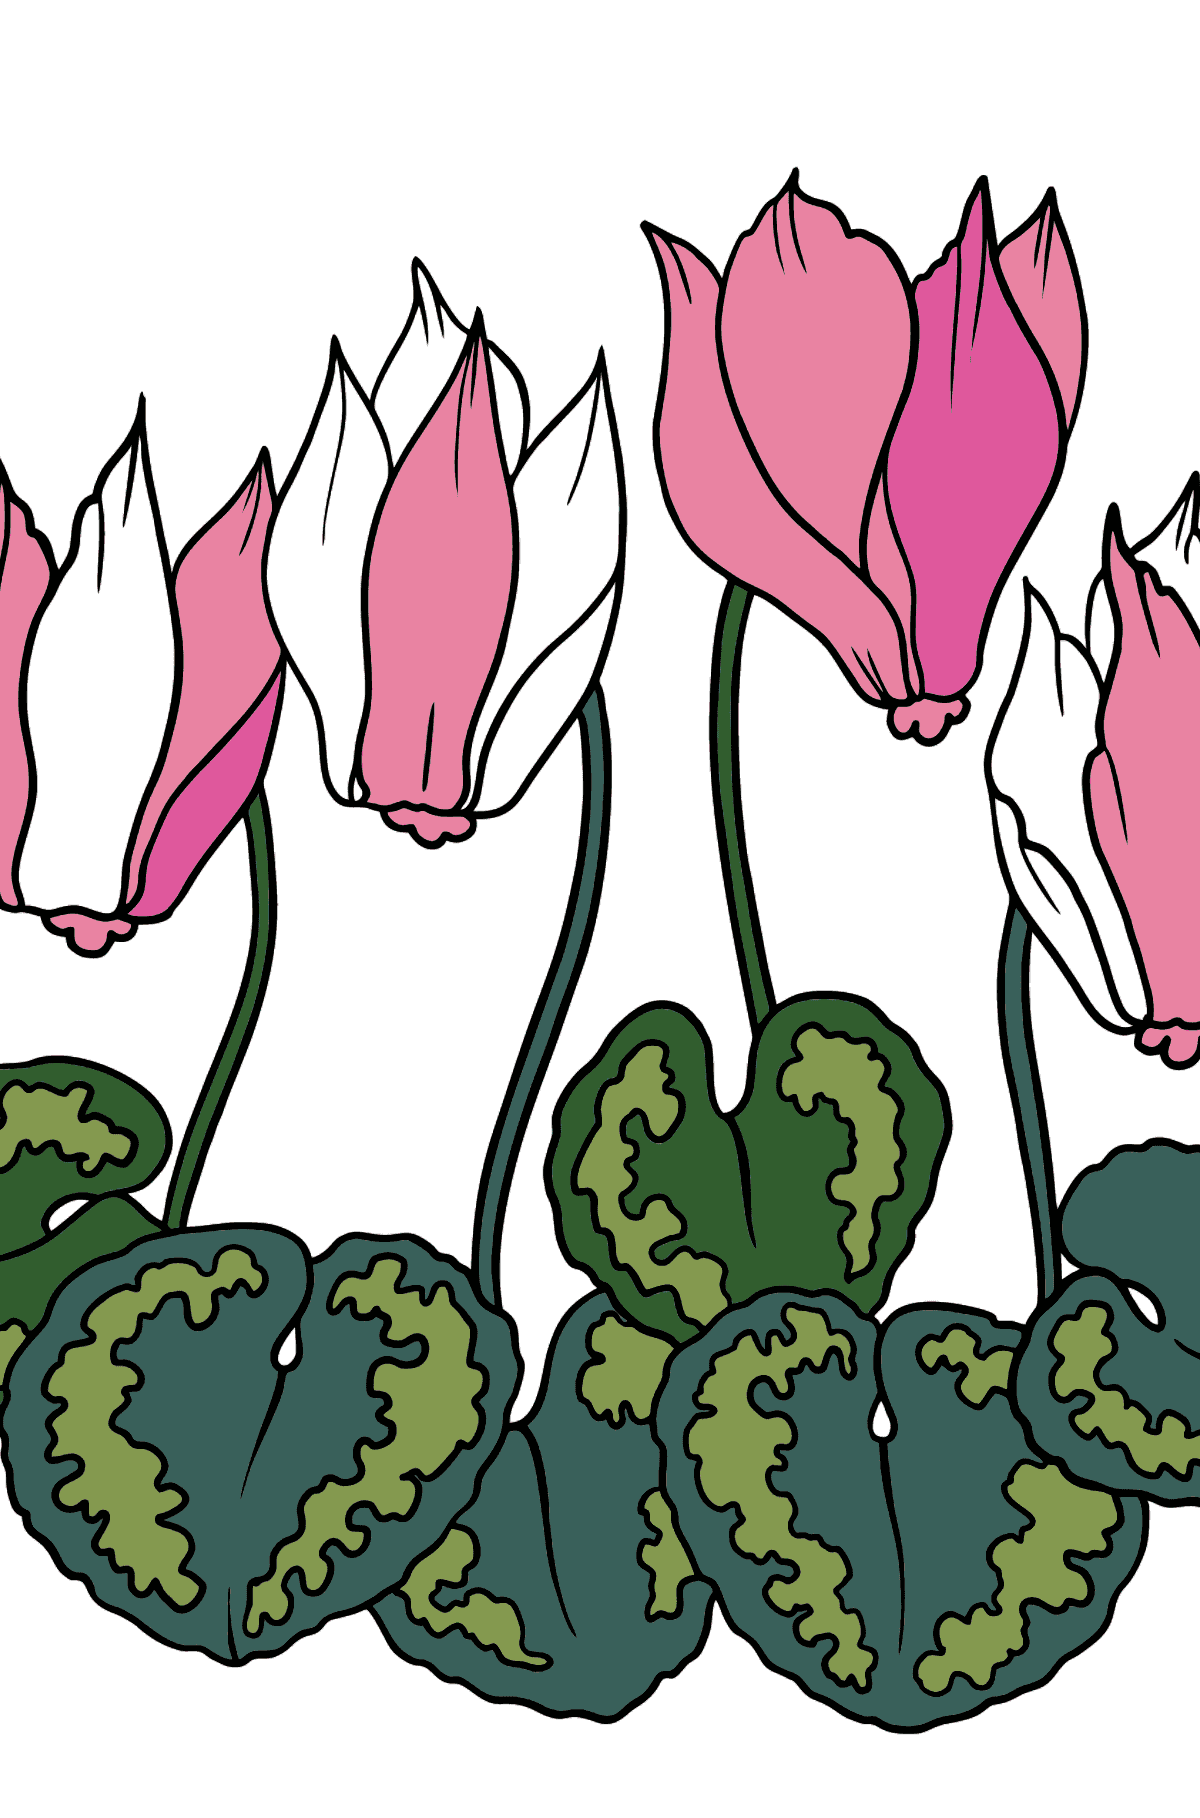 Flower Coloring Page - A Bright Pink Cyclamen - Coloring Pages for Kids